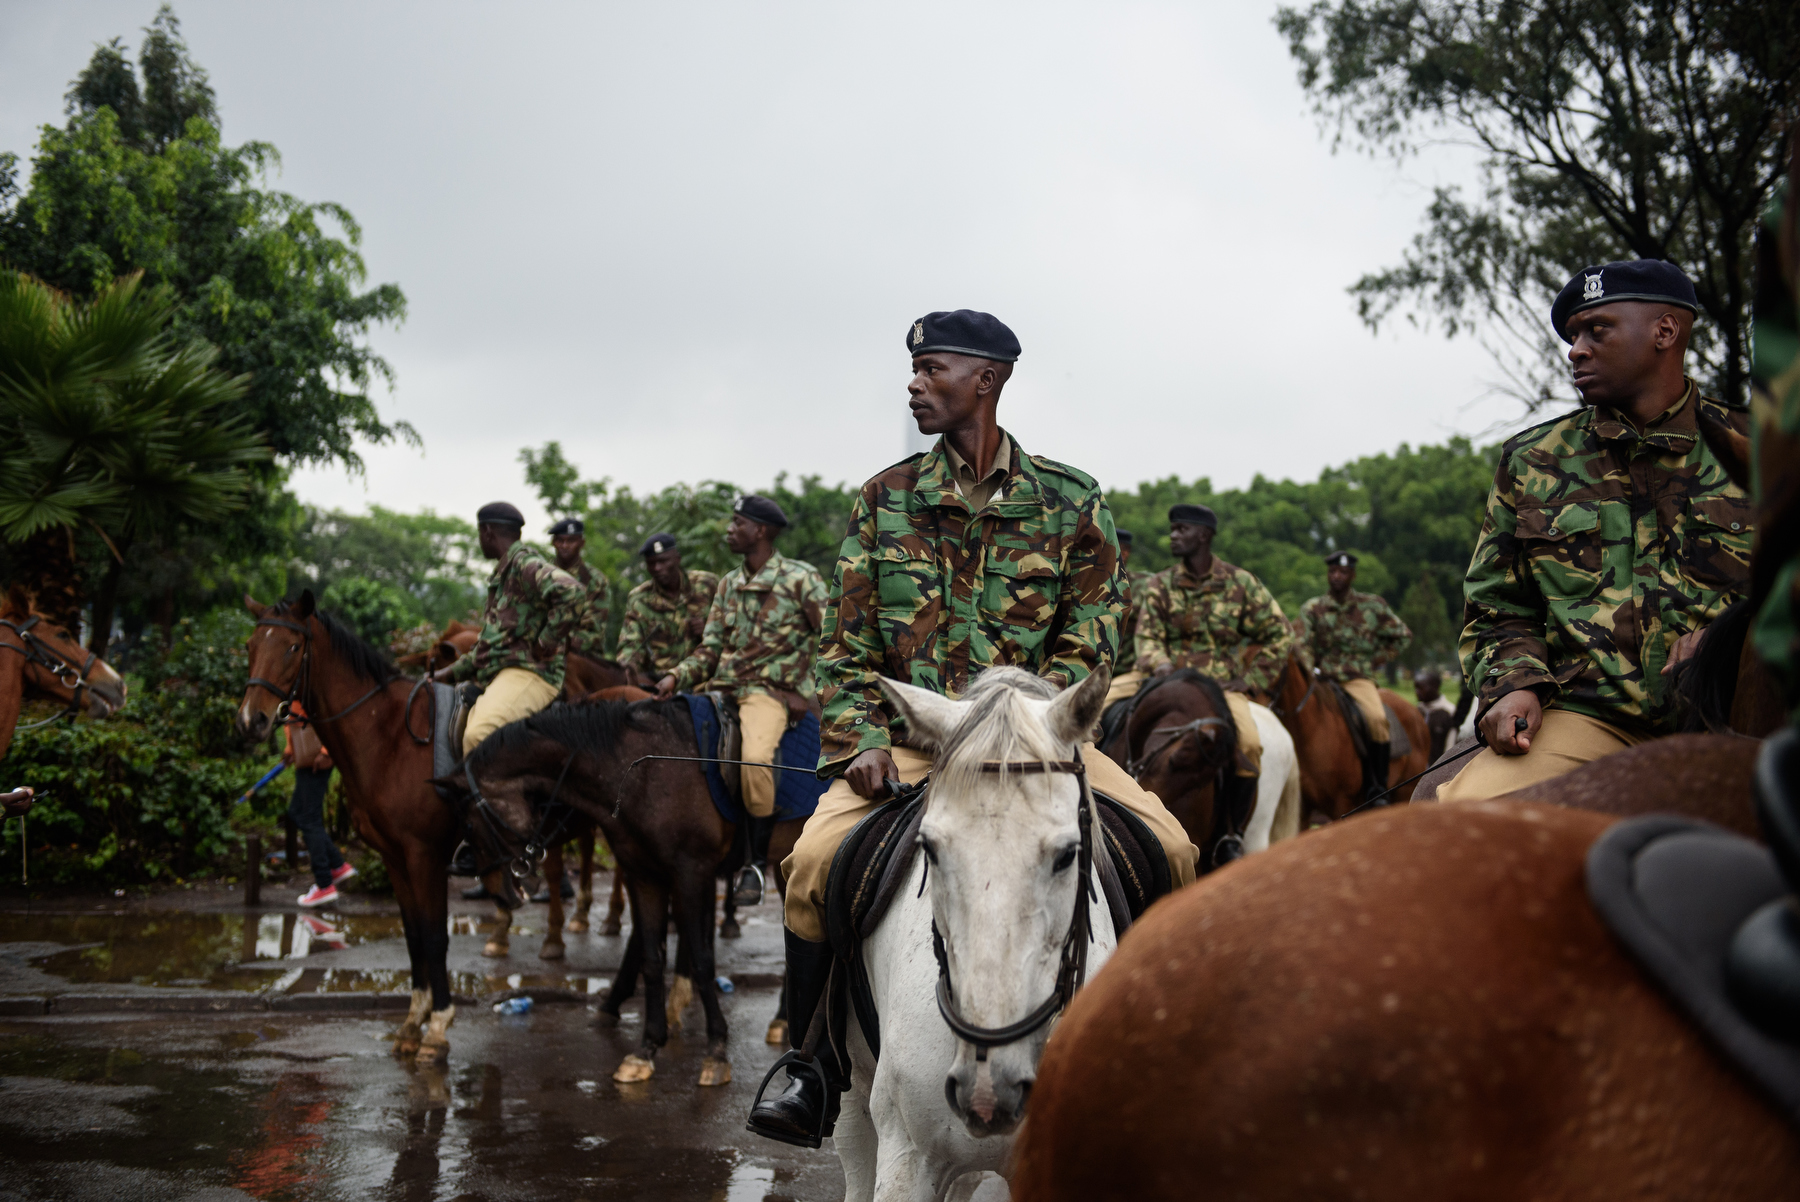  Kenyan mounted security patrol Uhuru Park and central Nairobi ahead of the Pope's speech at University of Nairobi on 26 November 2015. Pope Francis is on a five-day visit to Kenya, Uganda and Central African Republic (CAR). AFP PHOTO/Jennifer HUXTA
